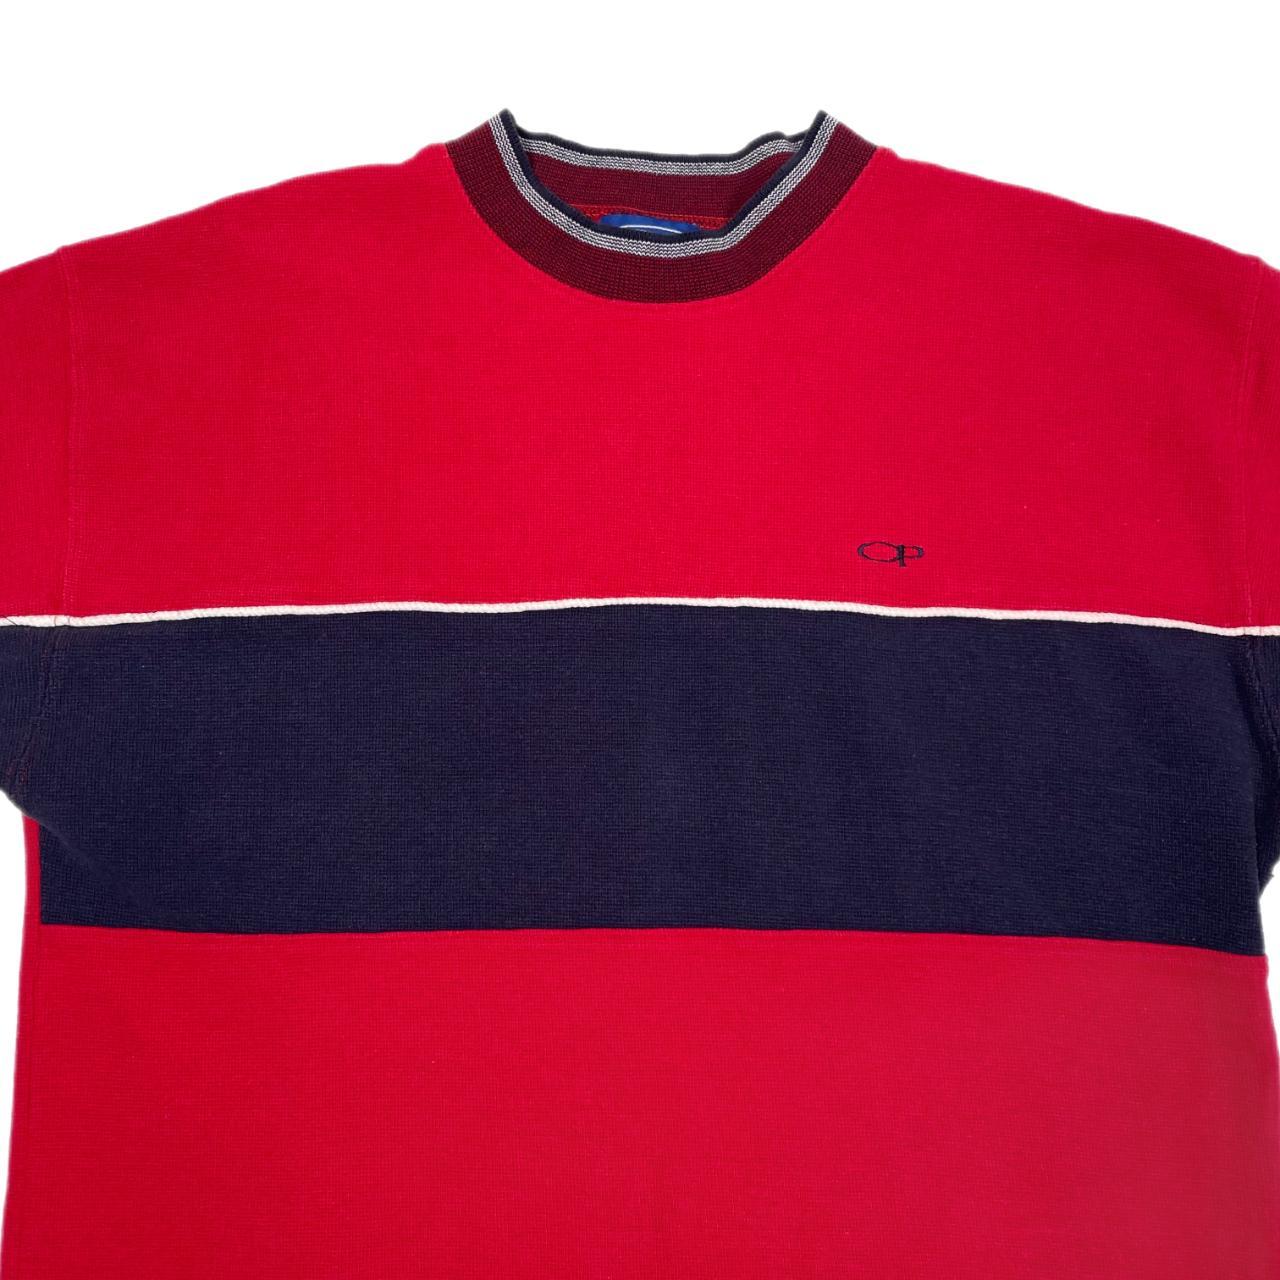 Ocean Pacific Men's Red and Navy T-shirt (3)